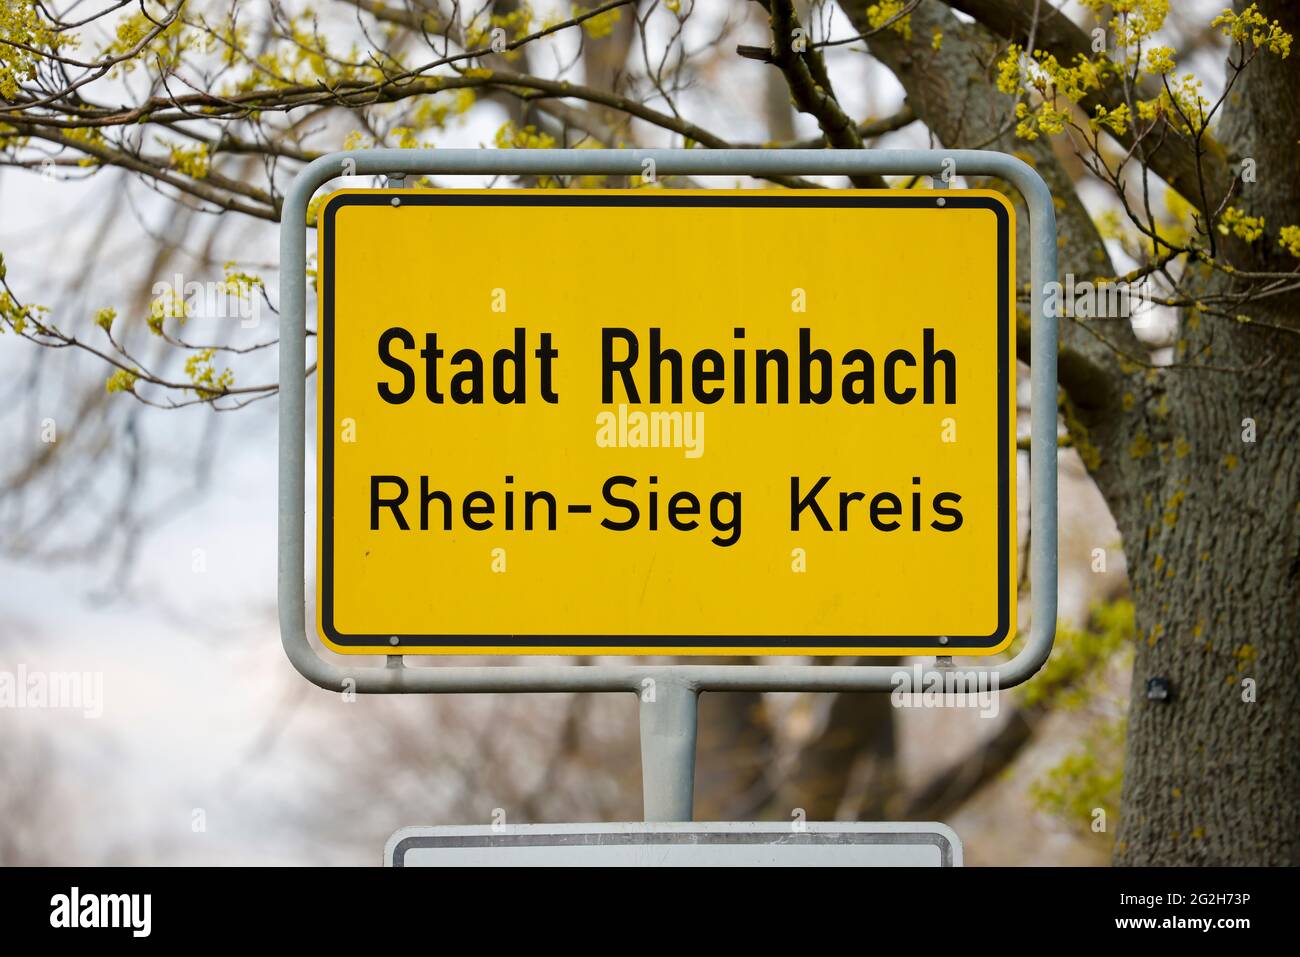 Rheinbach, North Rhine-Westphalia, Germany - Place name sign Stadt Rheinbach, Rhein-Sieg-Kreis, Rheinbach participates in corona study by Hendrik Streeck, the city of Rheinbach becomes a comparative municipality to the community of Gangelt in the Heinsberg district within the corona study. The aim is to investigate whether people who have been infected are immune to renewed infections. Stock Photo